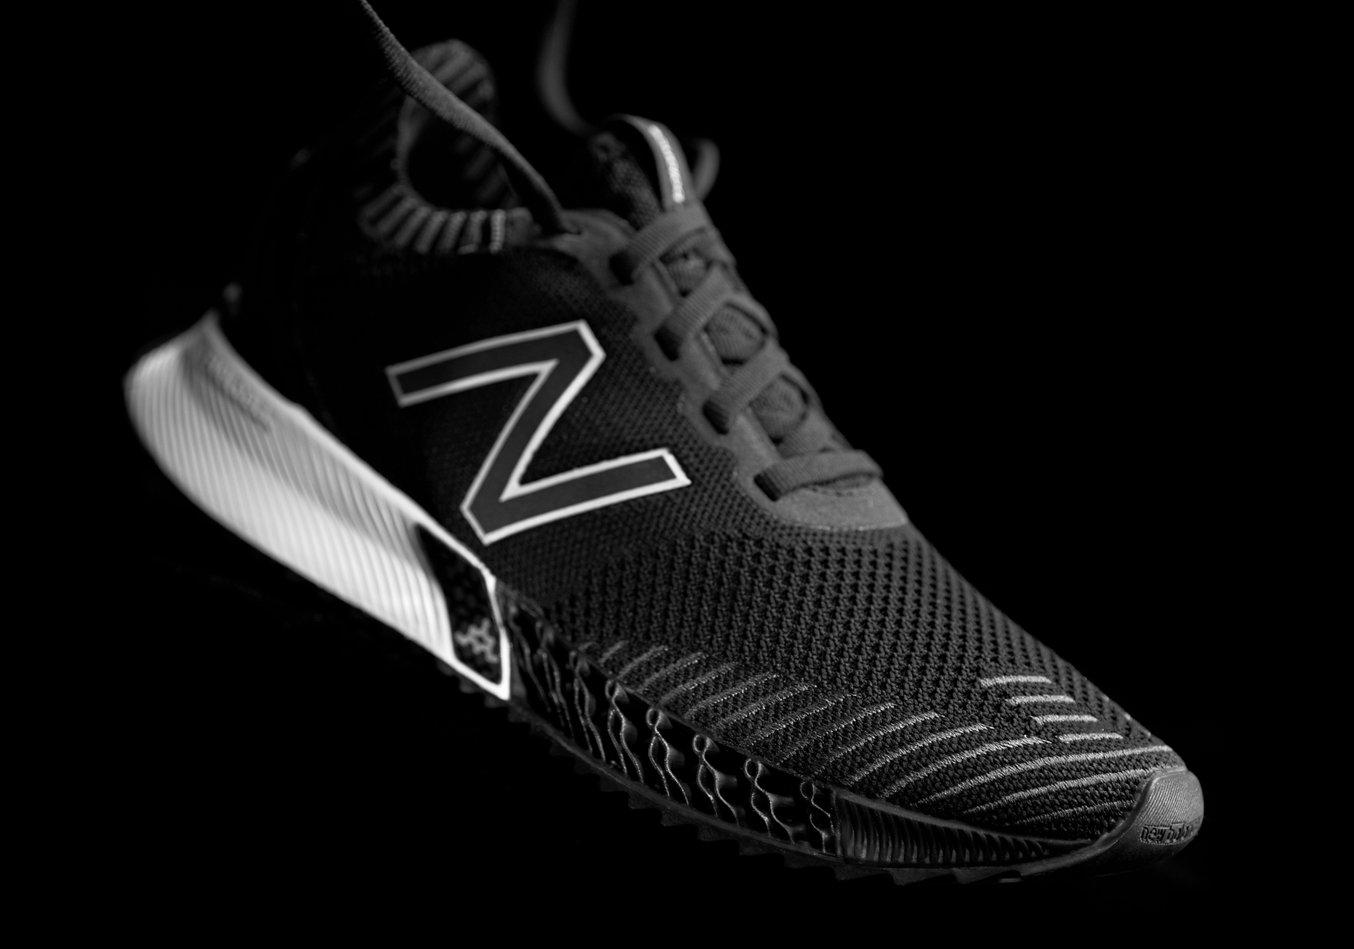 Formlabs New Balance: The Future of Performance Products With Customized Formlabs